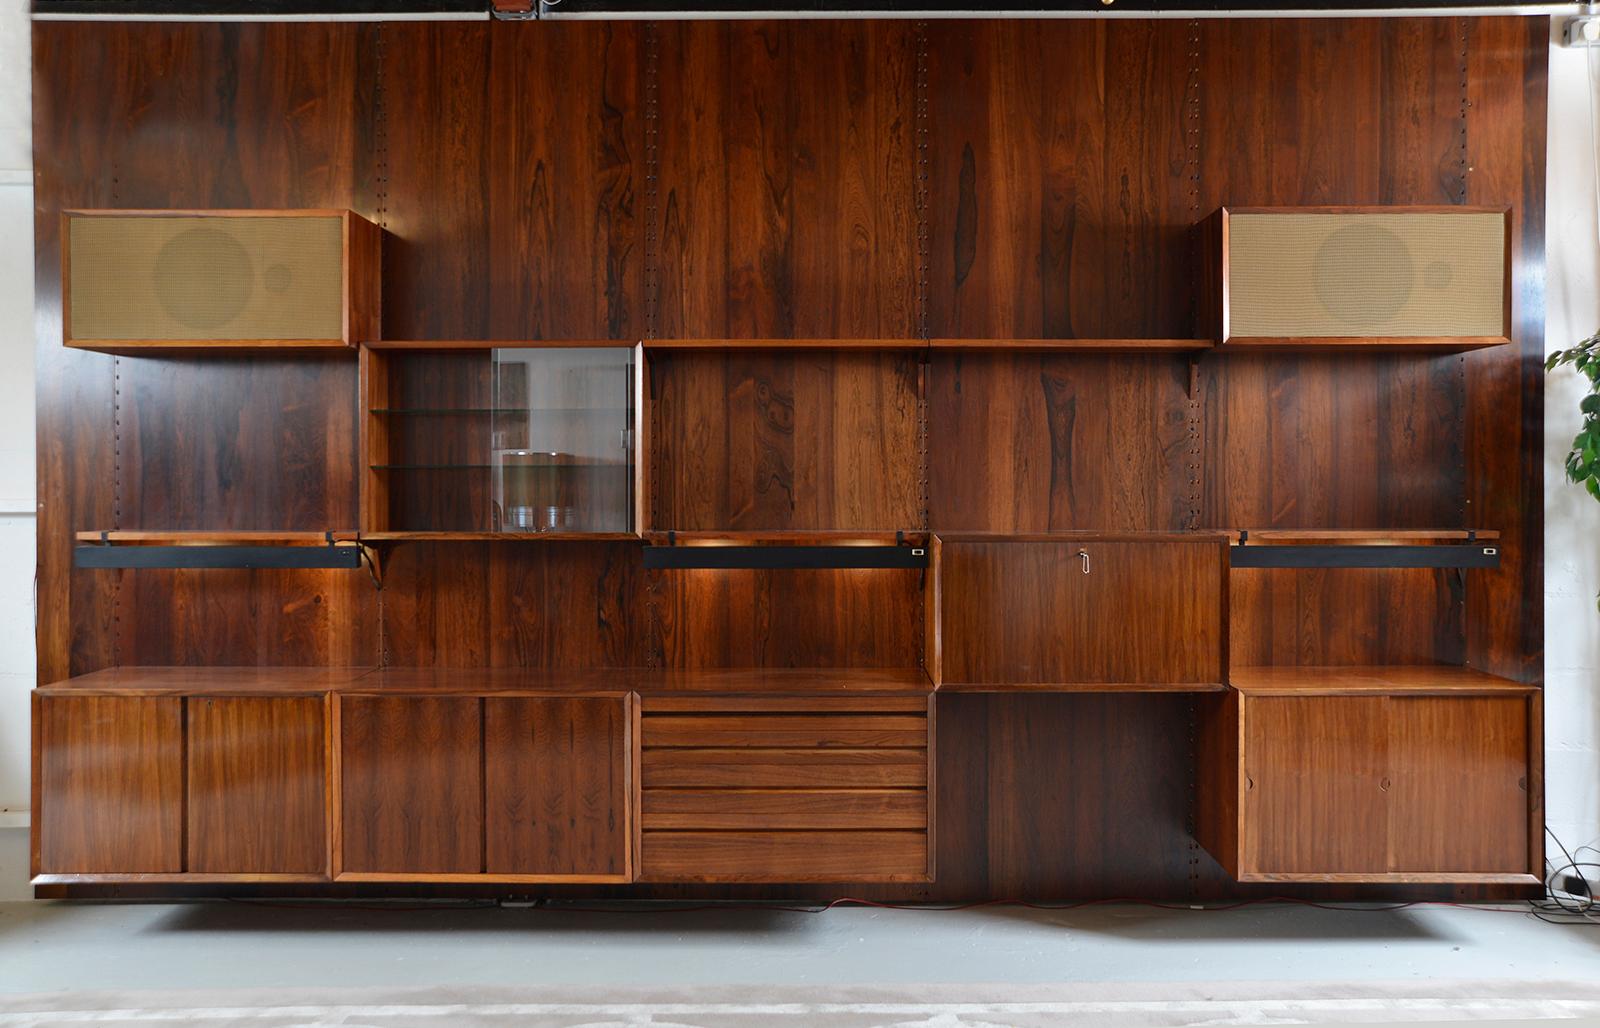 This particular system is commonly referred to as ‘Cado’ to differentiate it from the ‘Royal System', also designed by Poul Cadovius. 
The spectacular modular rosewood wall system is in really lovely condition with stunning figuring, showing only